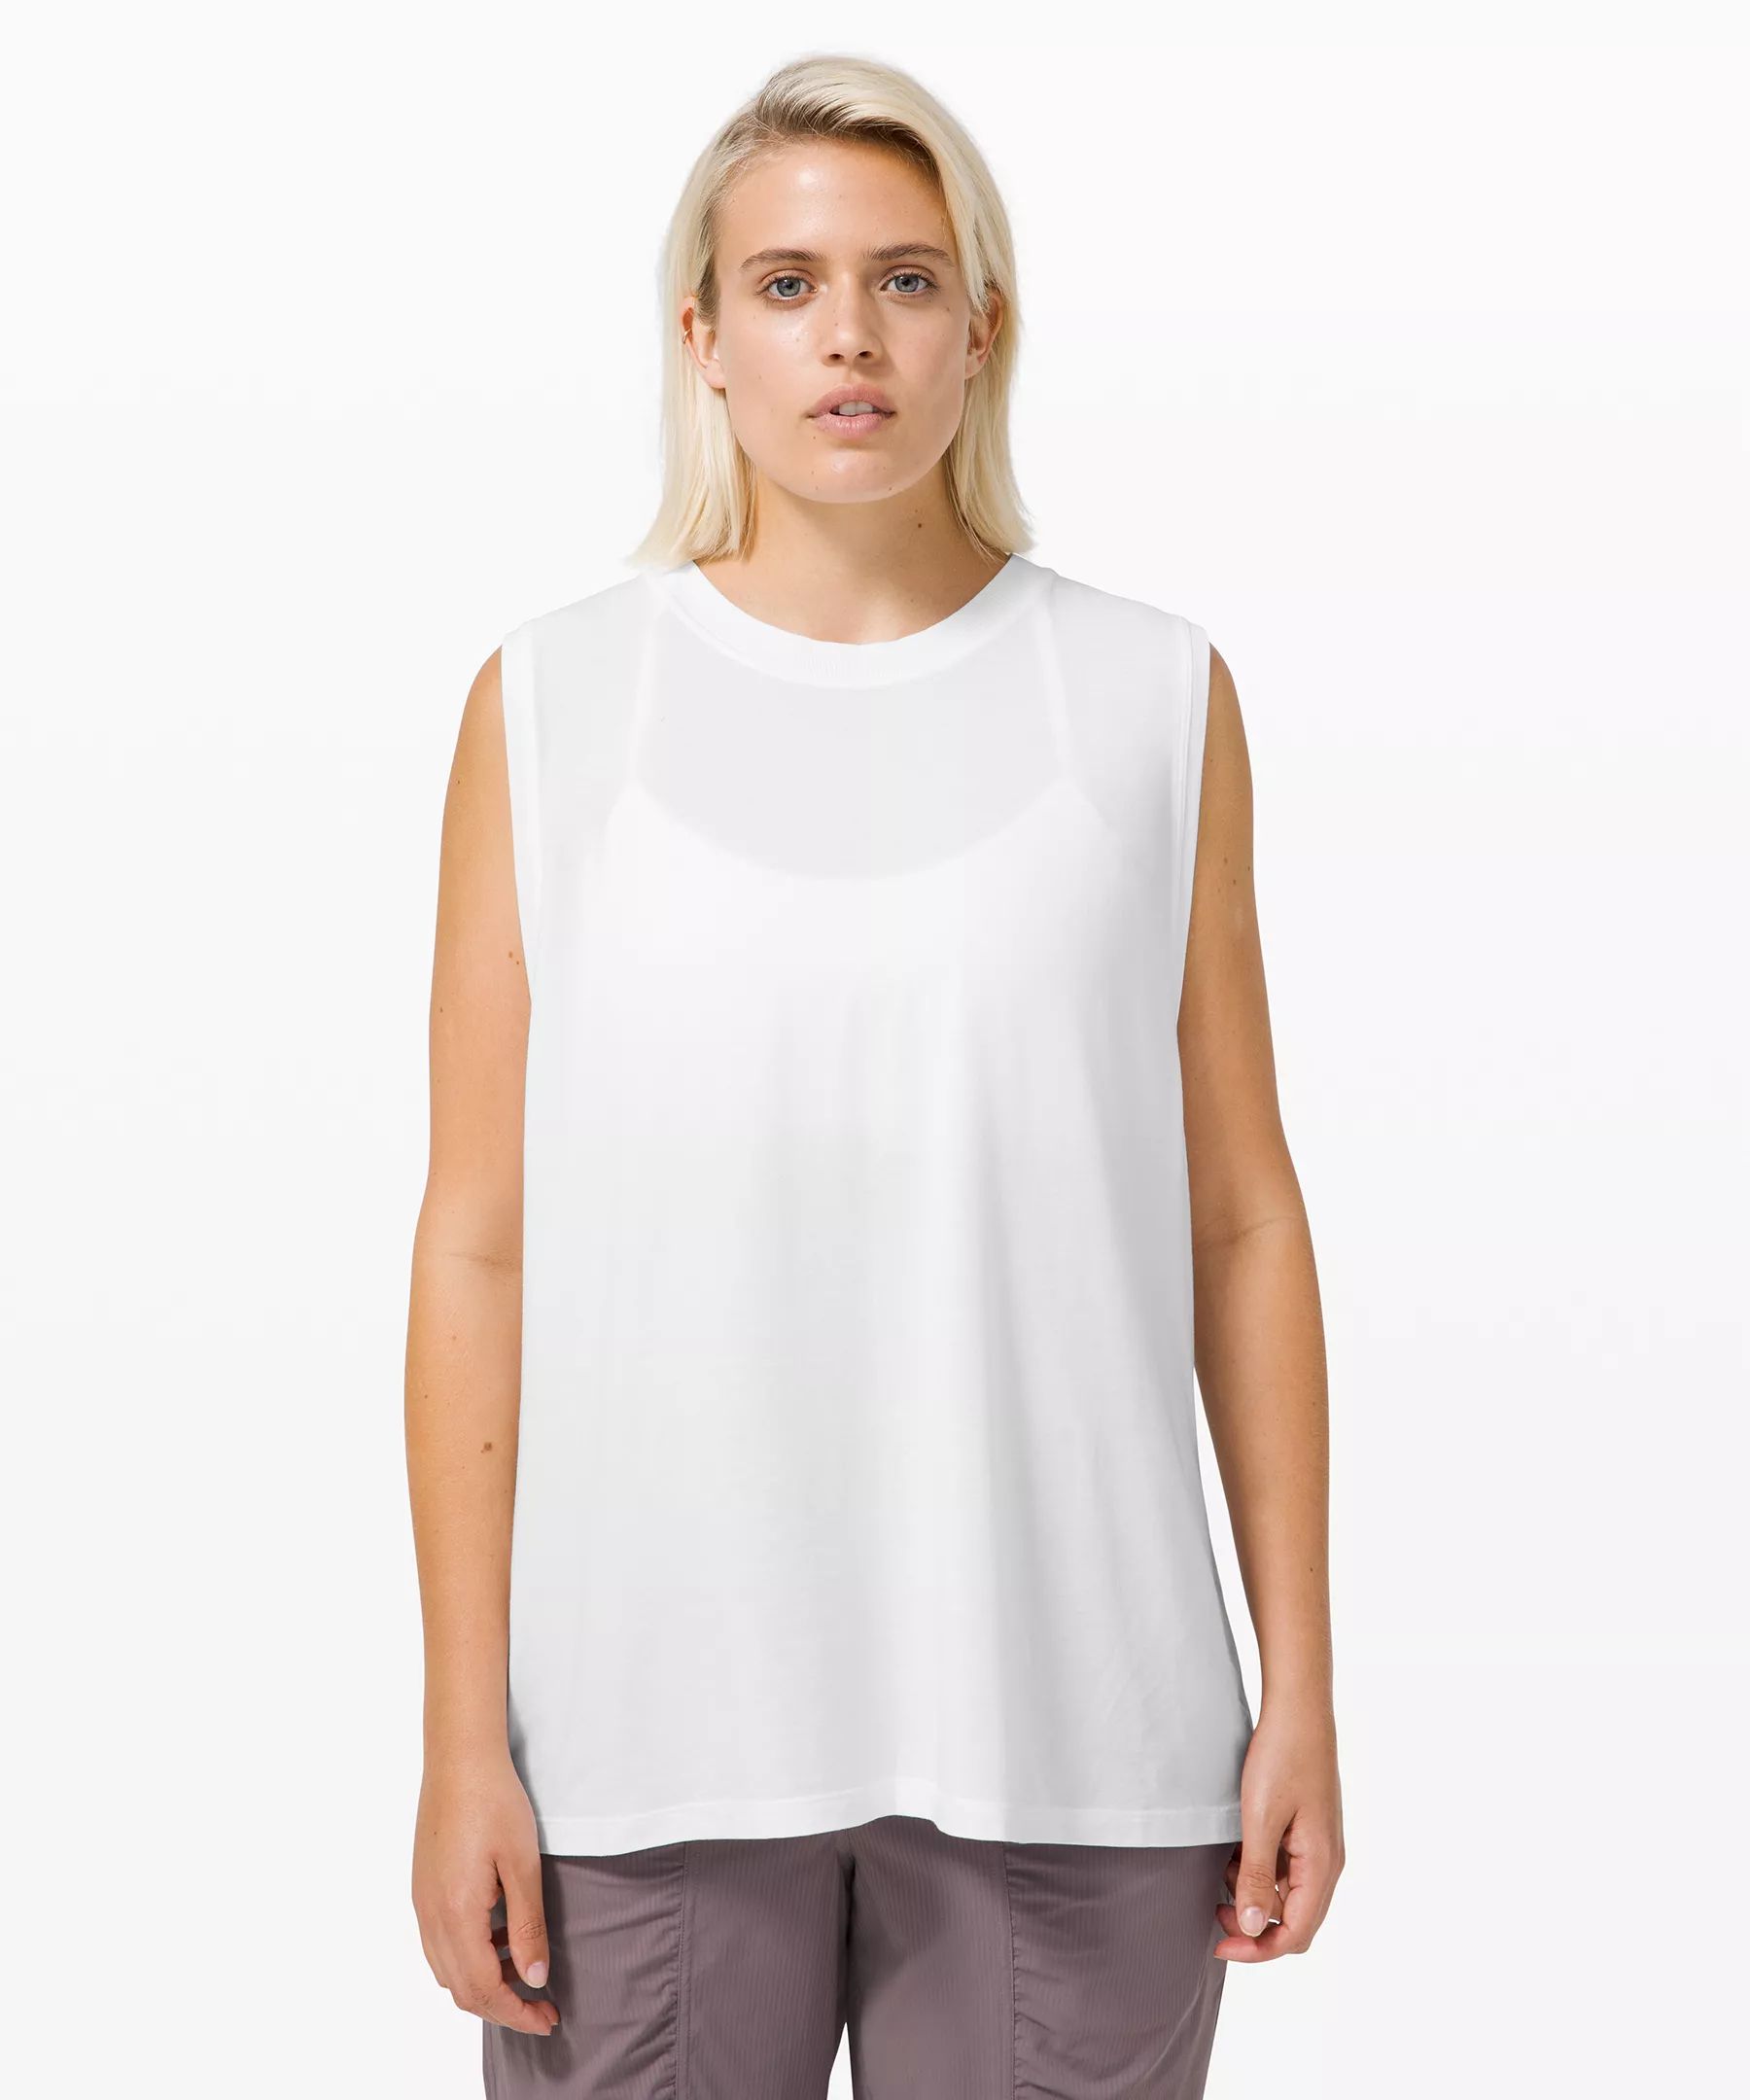 All Yours Tank Top | Lululemon (US)